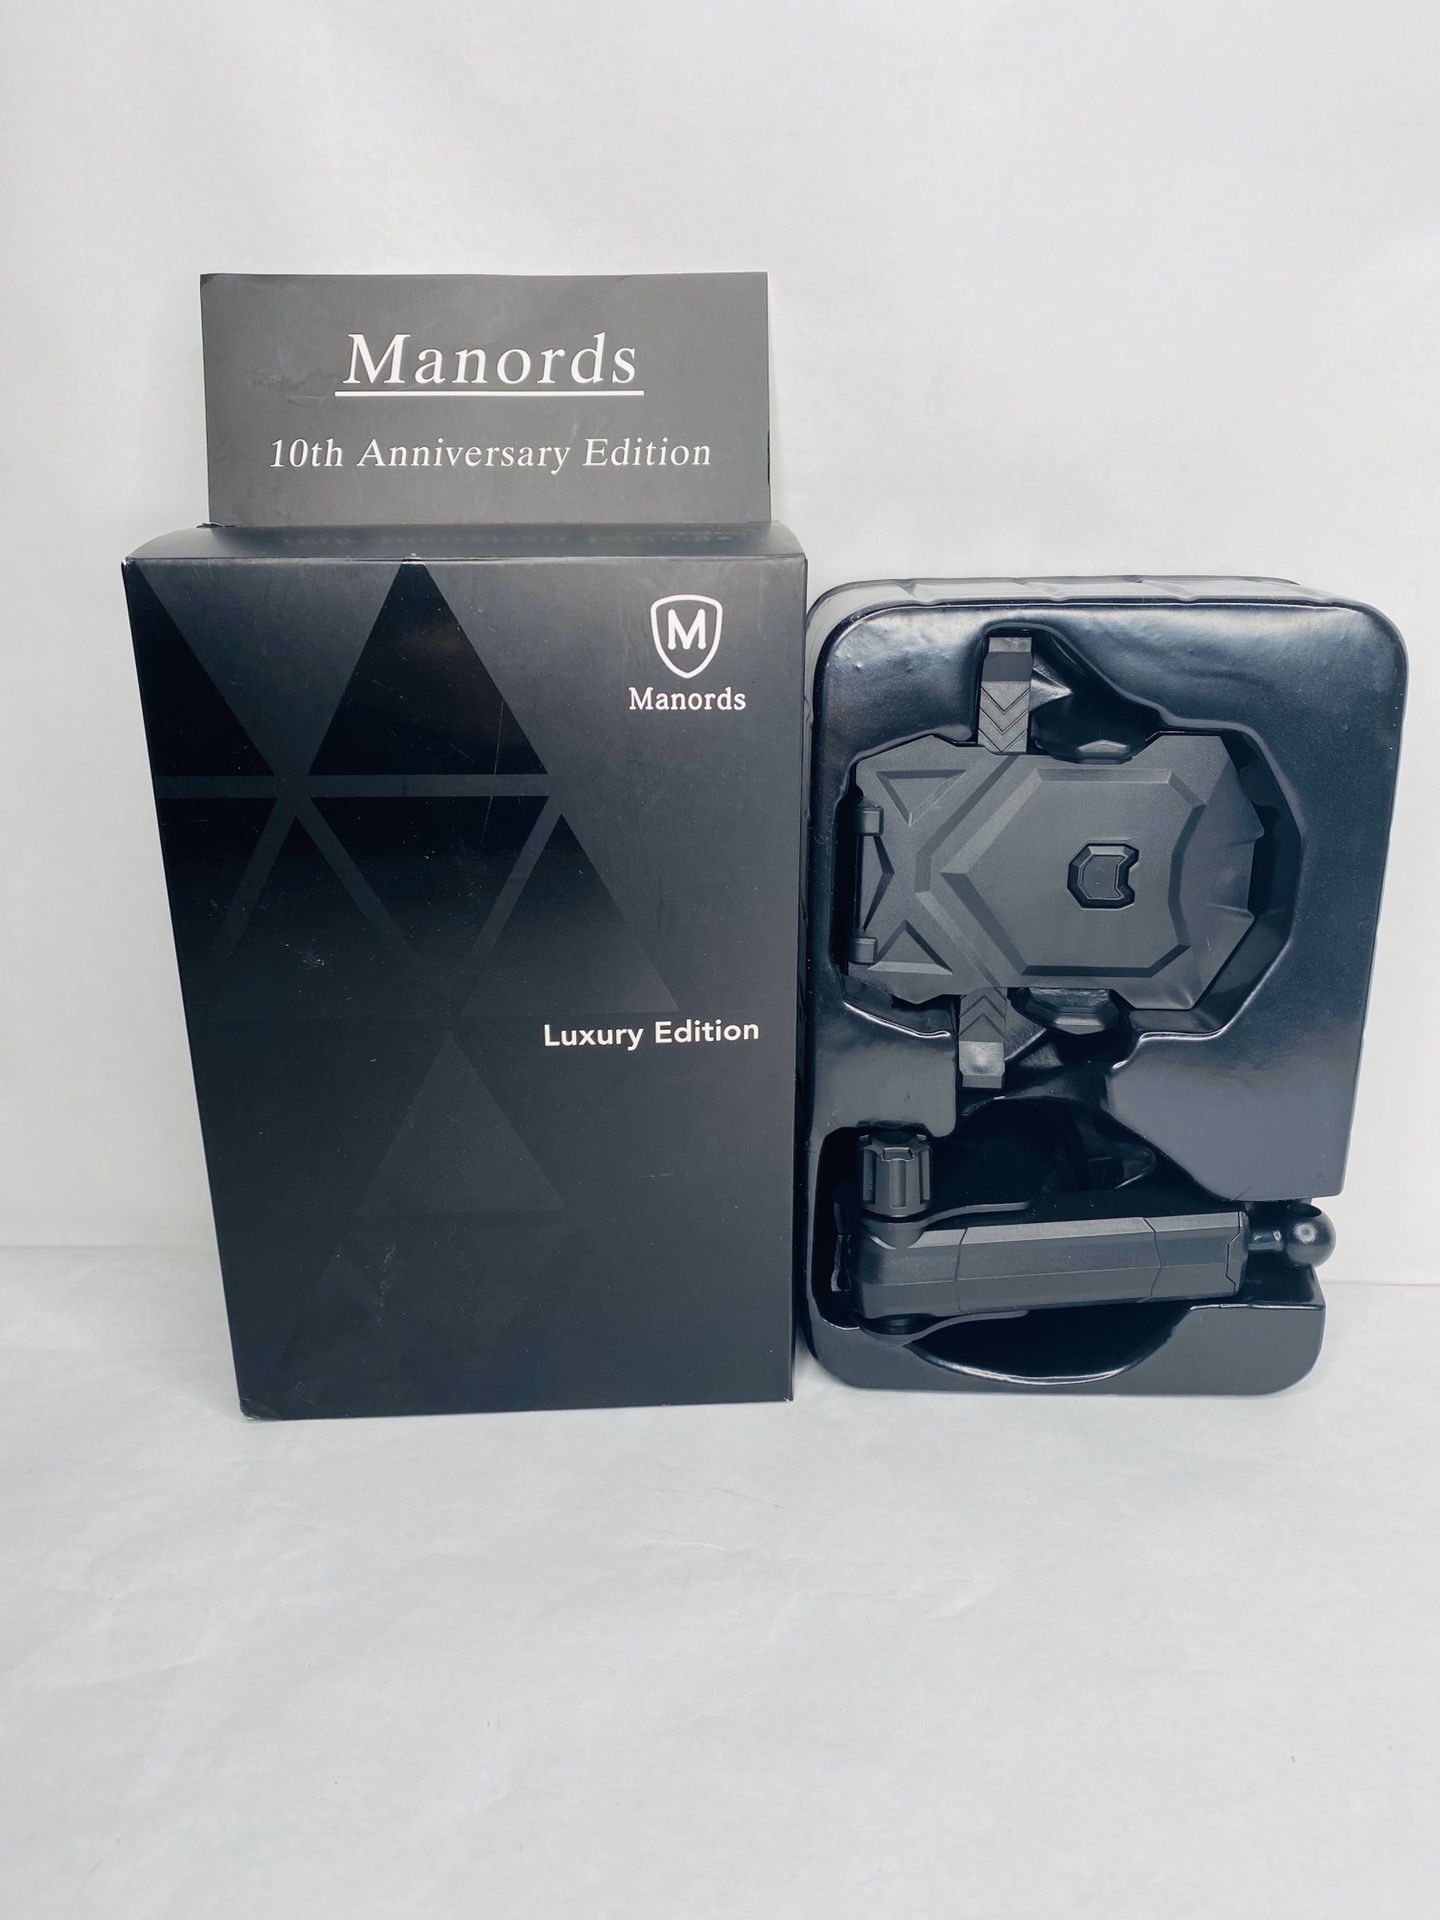 Phone Holder for Car, MANORDS Universal Long Neck Car Mount Holder Compatible iPhone Xs XS Max XR X 8 8 Plus 7 7 Plus Samsung Galaxy S10 S9 S8 S7 S6